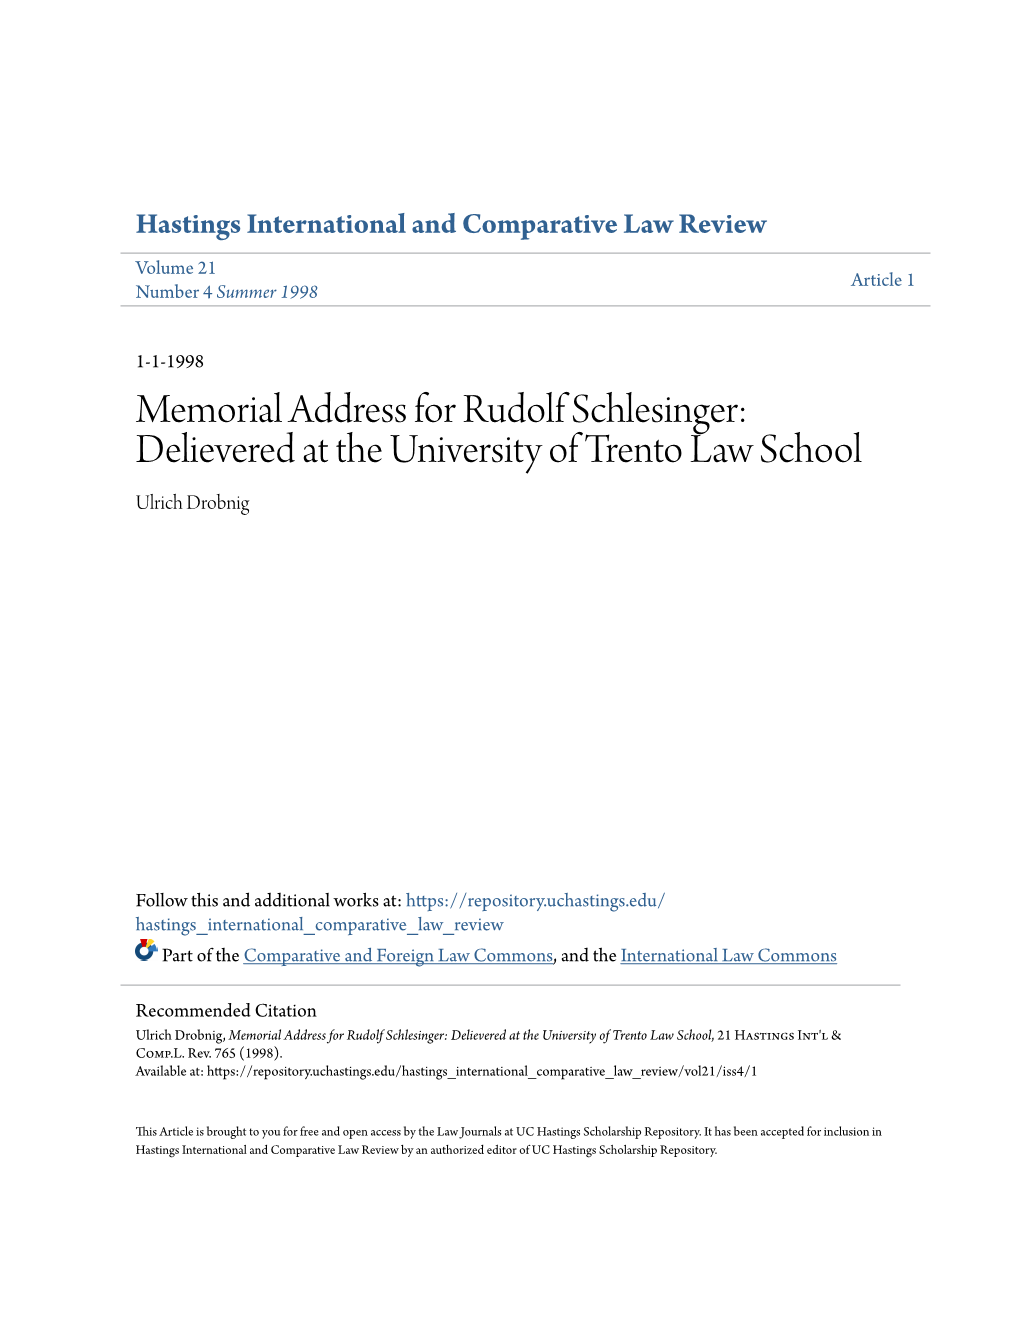 Memorial Address for Rudolf Schlesinger: Delievered at the University of Trento Law School Ulrich Drobnig